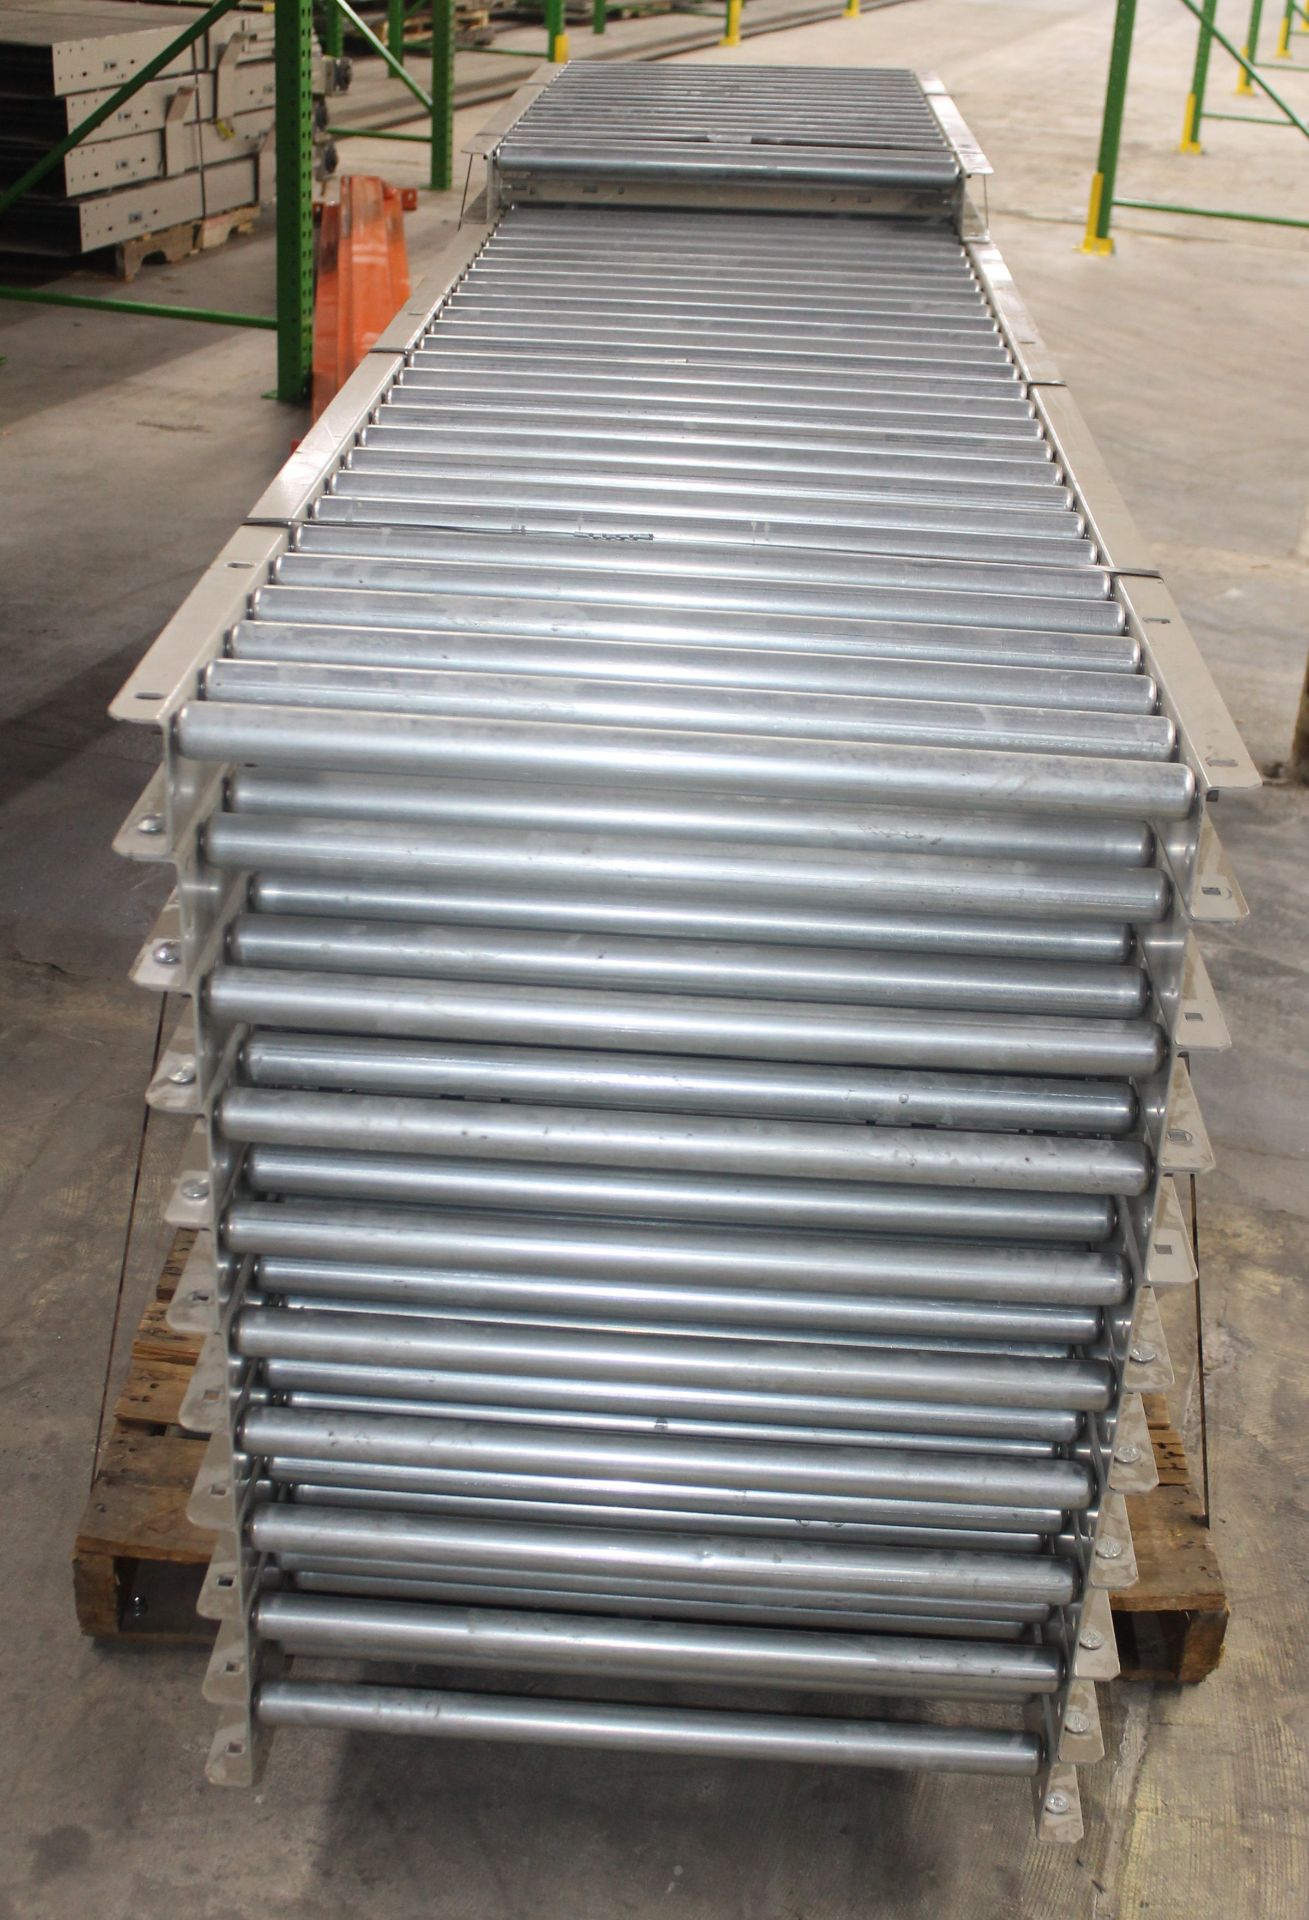 208 FT OF HK SYSTEM 24"W ROLLER GRAVITY CONVEYOR WITH LEGS